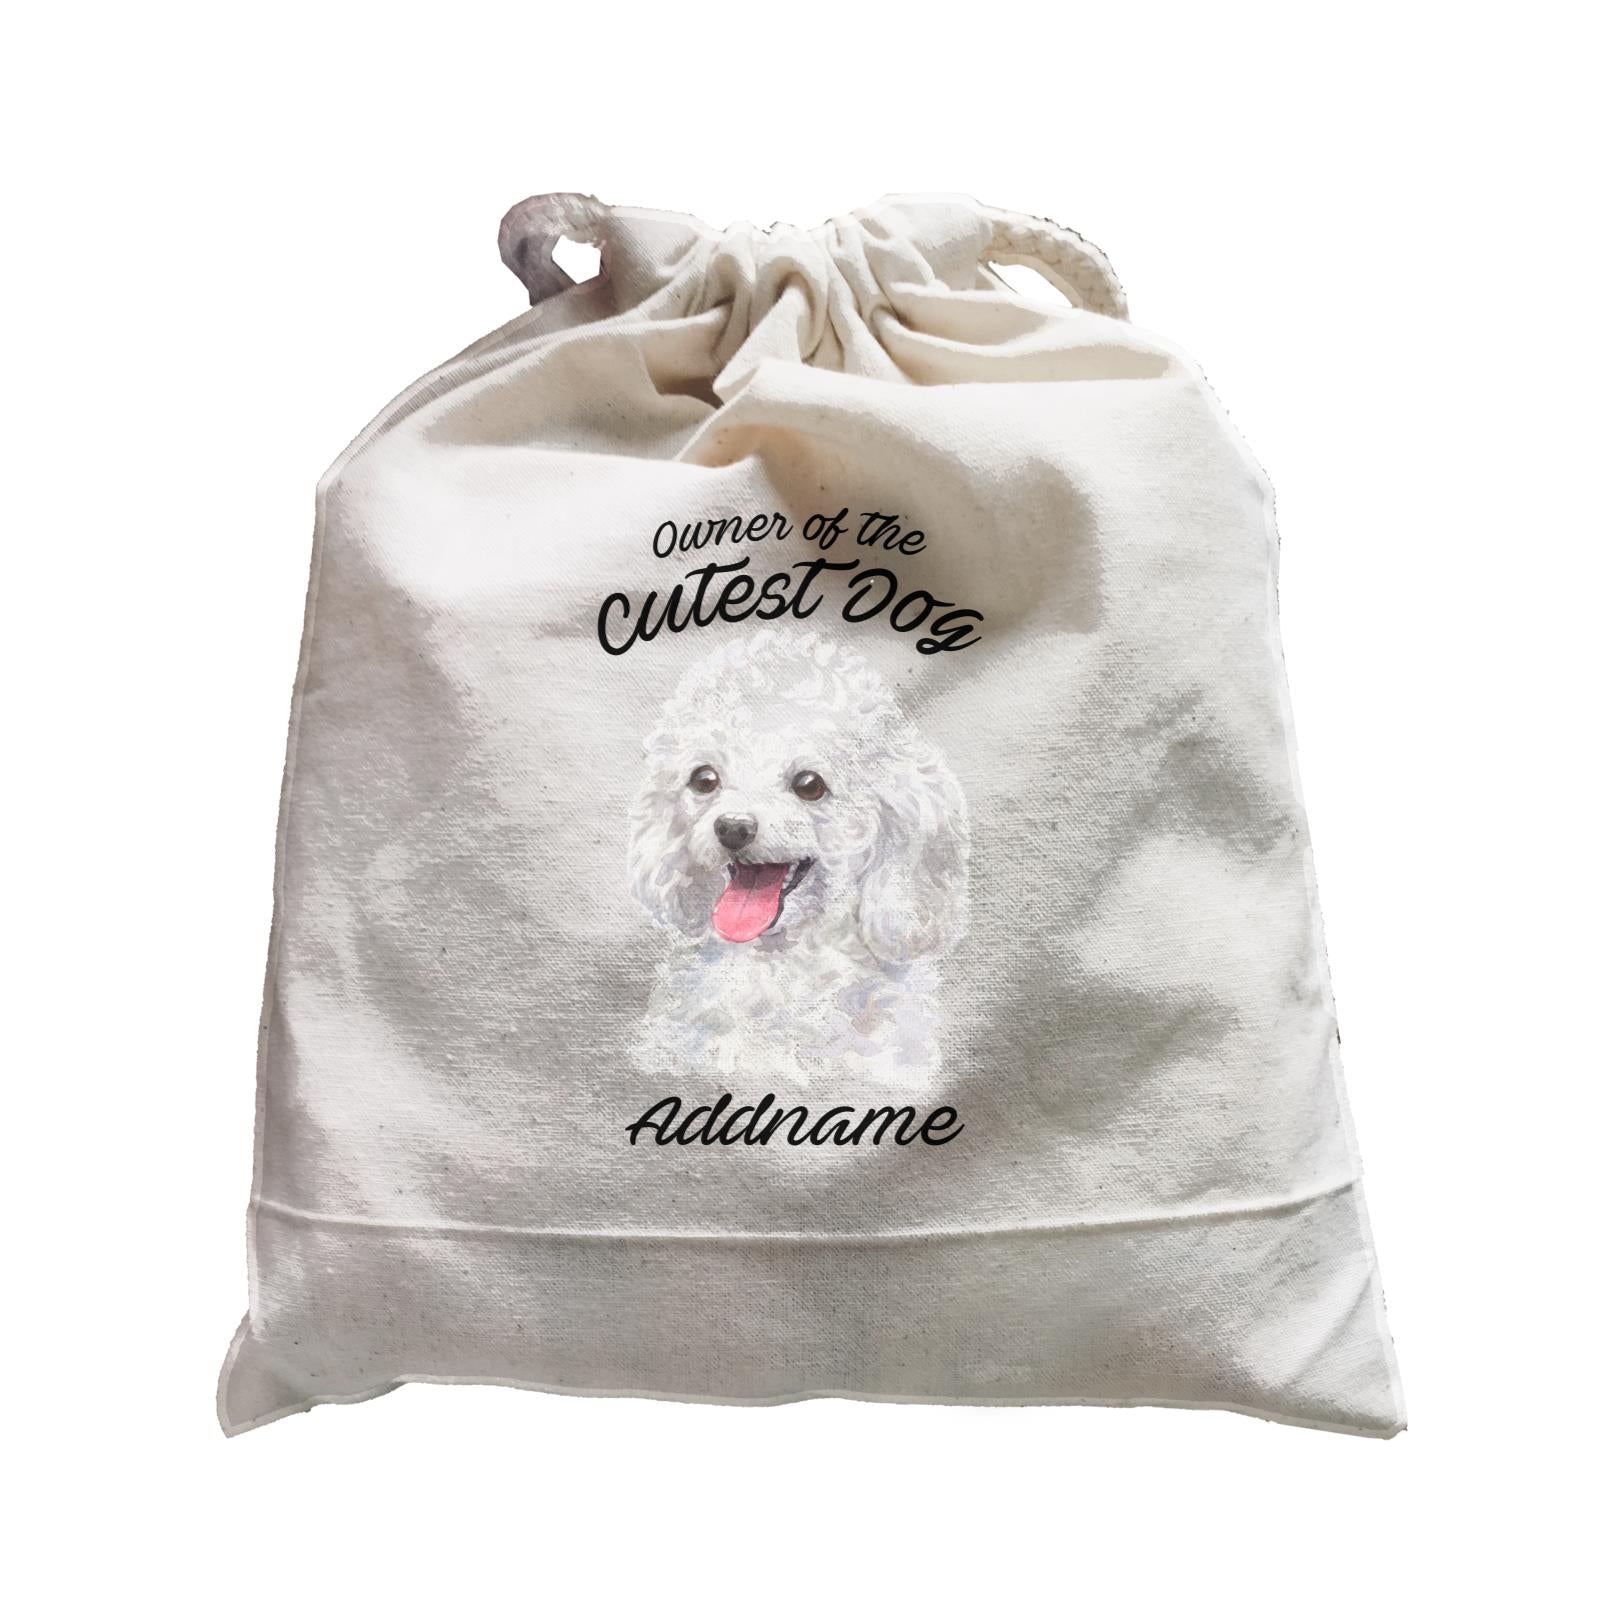 Watercolor Dog Owner Of The Cutest Dog Poodle White Addname Satchel